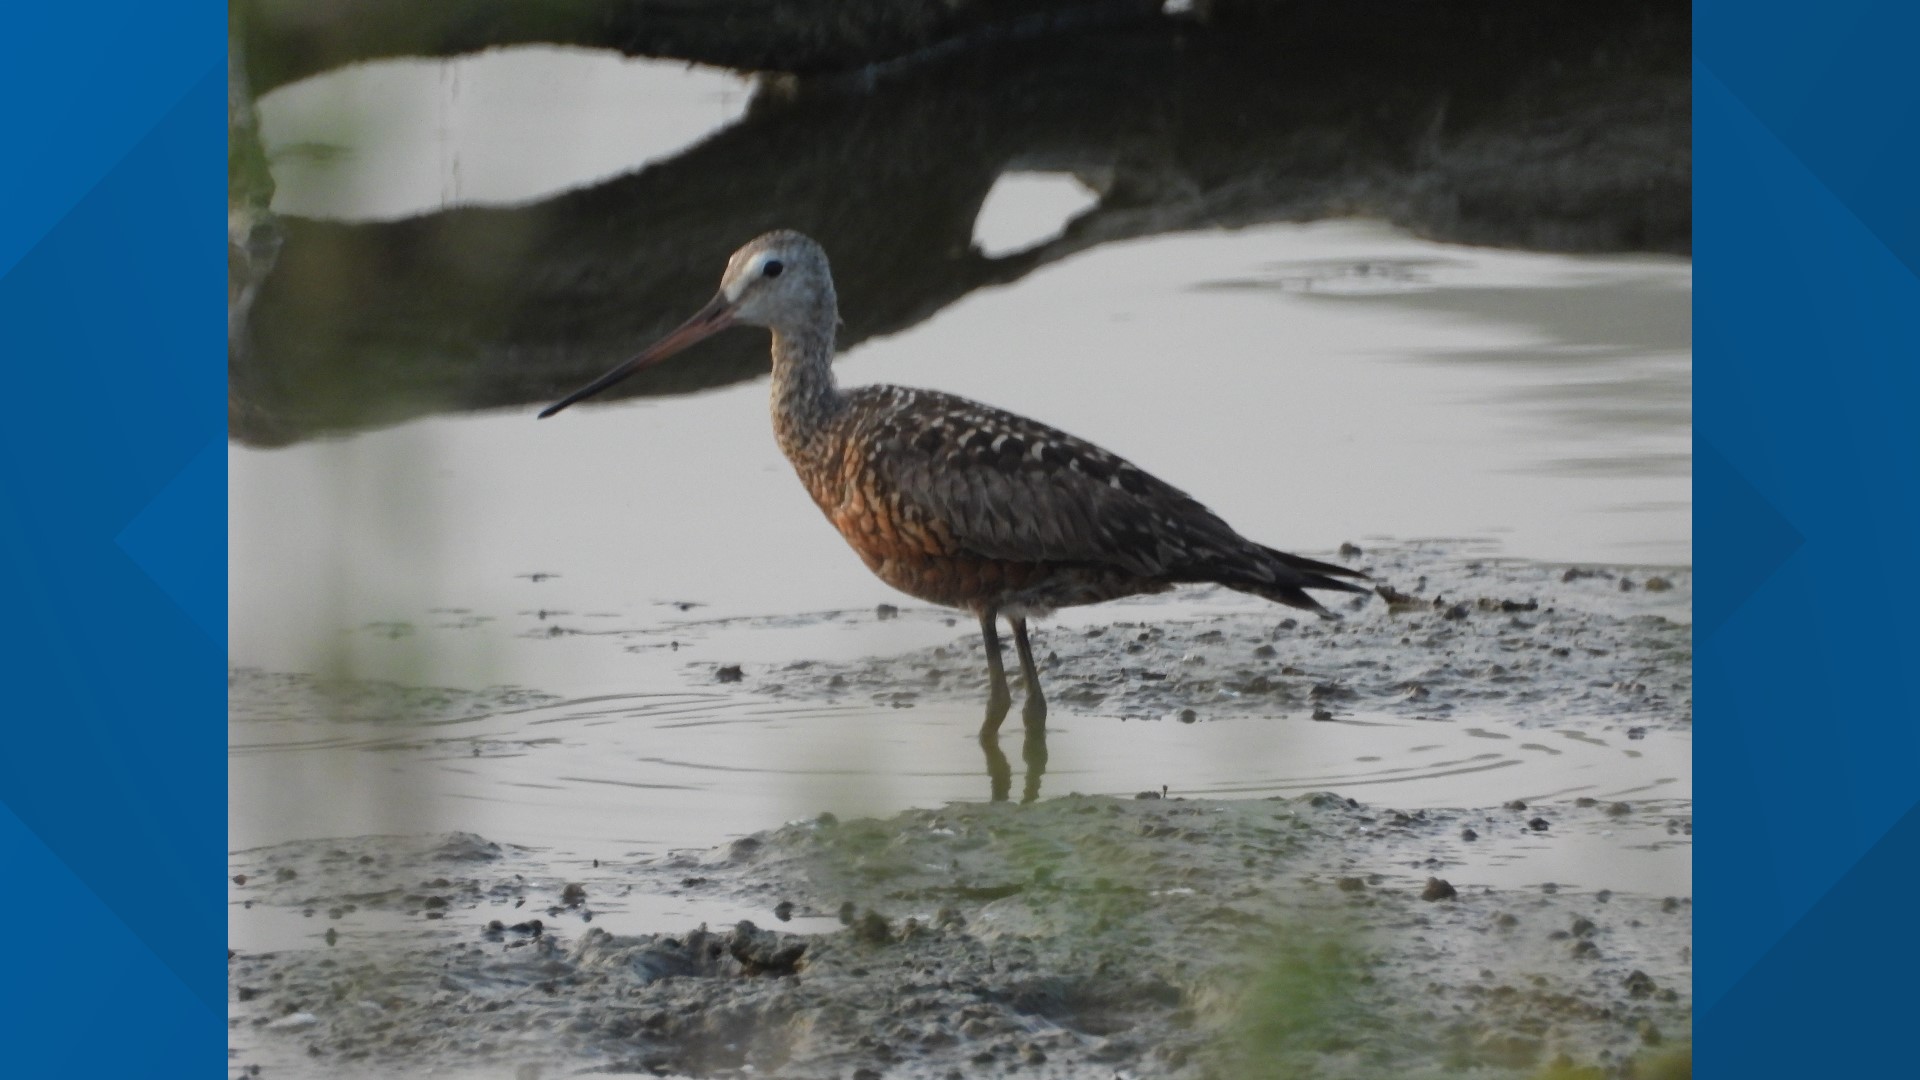 A Hudsonian godwit was spotted for the first time in 40 years at Middle Creek Wildlife Management Area just weeks after historic a limpkin sighting.